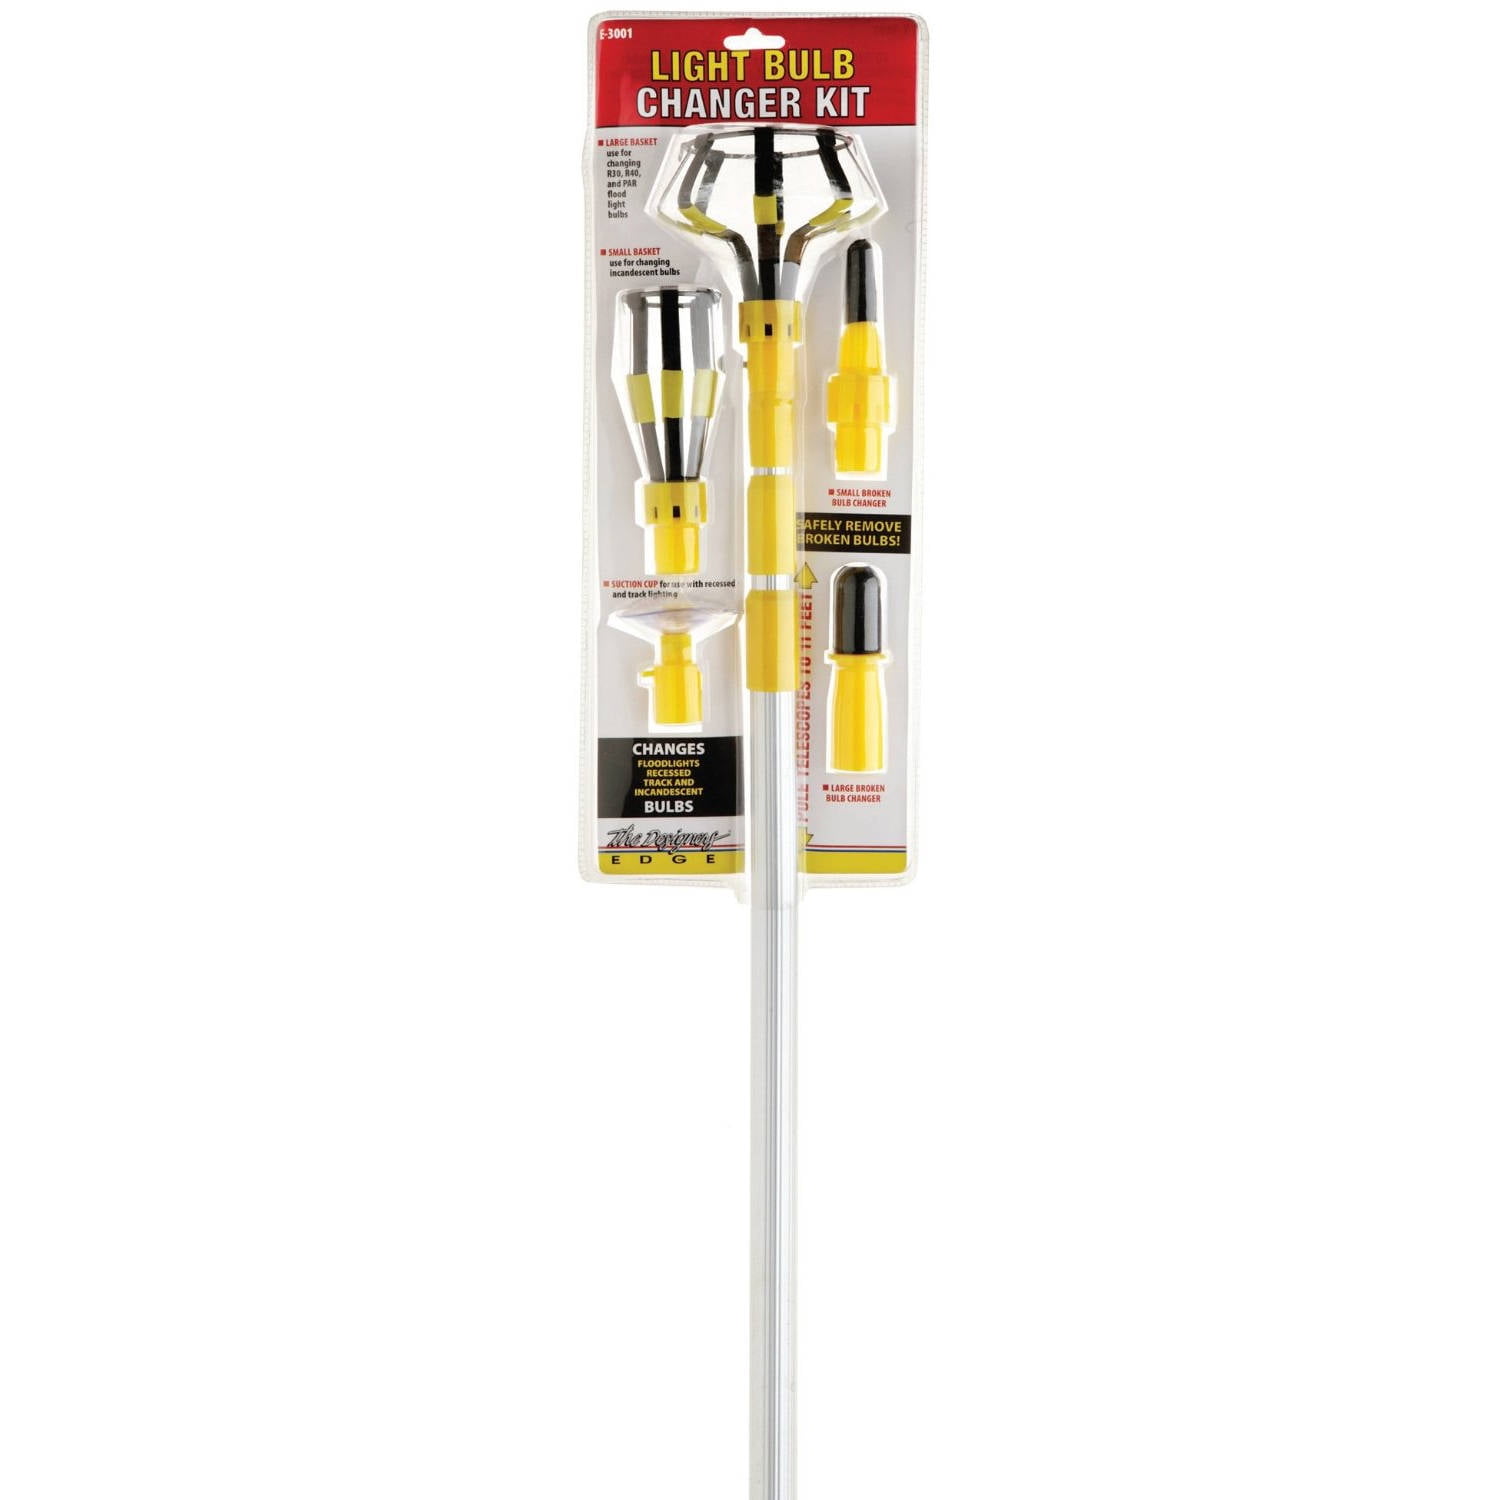 Photo 1 of Woods E3001 Light Changing Kit Foot Metal Telescopic Pole, Baskets, Suction Cup and Broken Bulb Changers, Versatile Use, 5 Accessories Included, 11 Feet Tall, 1 Count , Yellow

